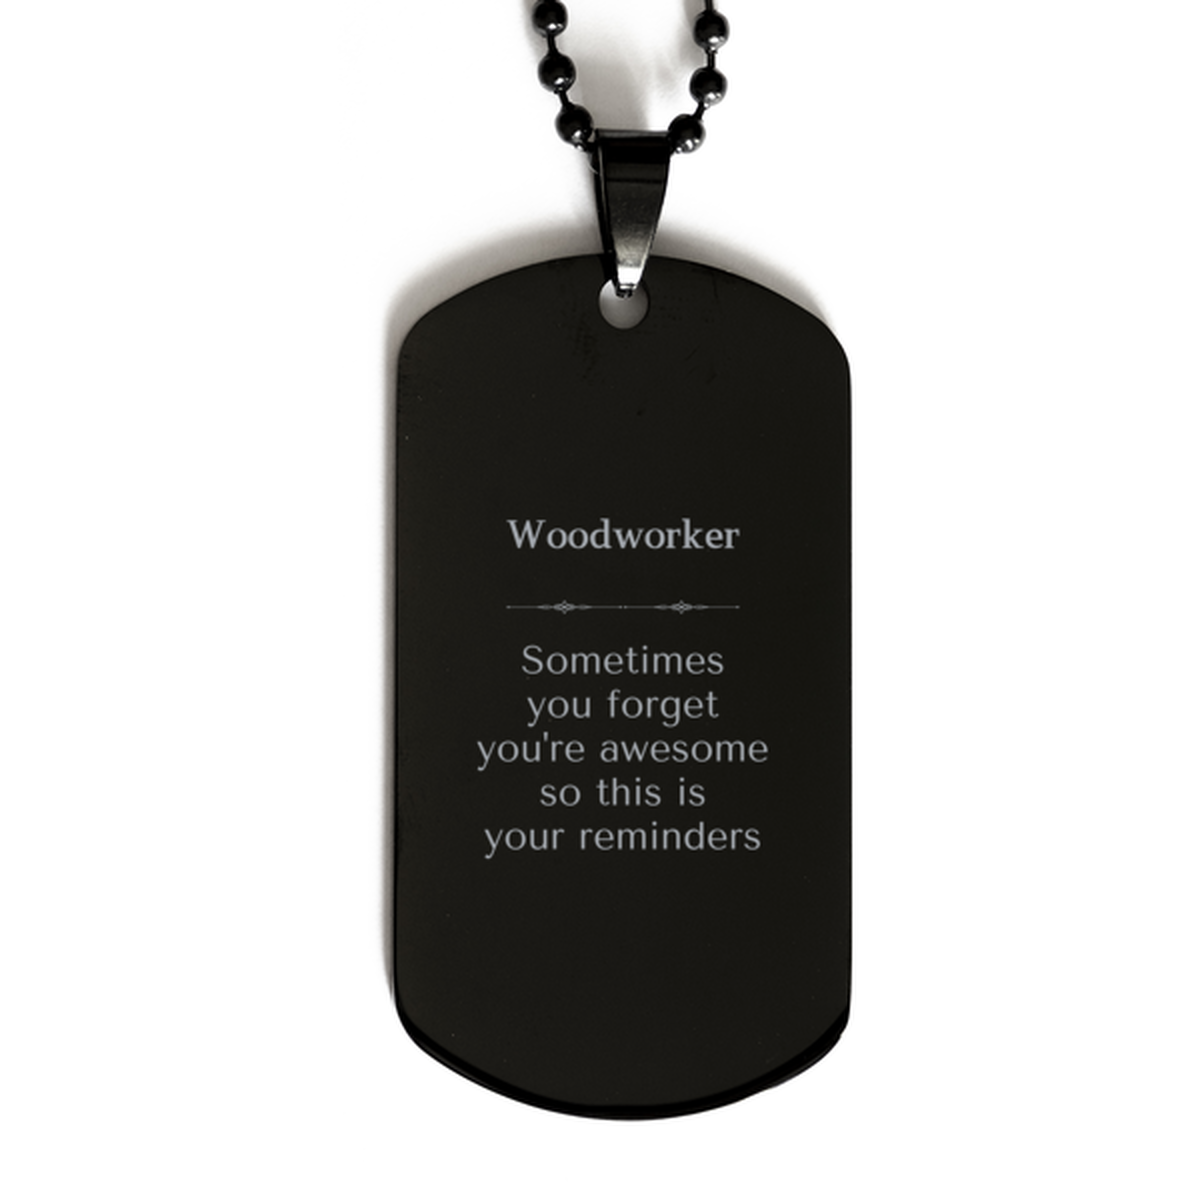 Sentimental Woodworker Black Dog Tag, Woodworker Sometimes you forget you're awesome so this is your reminders, Graduation Christmas Birthday Gifts for Woodworker, Men, Women, Coworkers